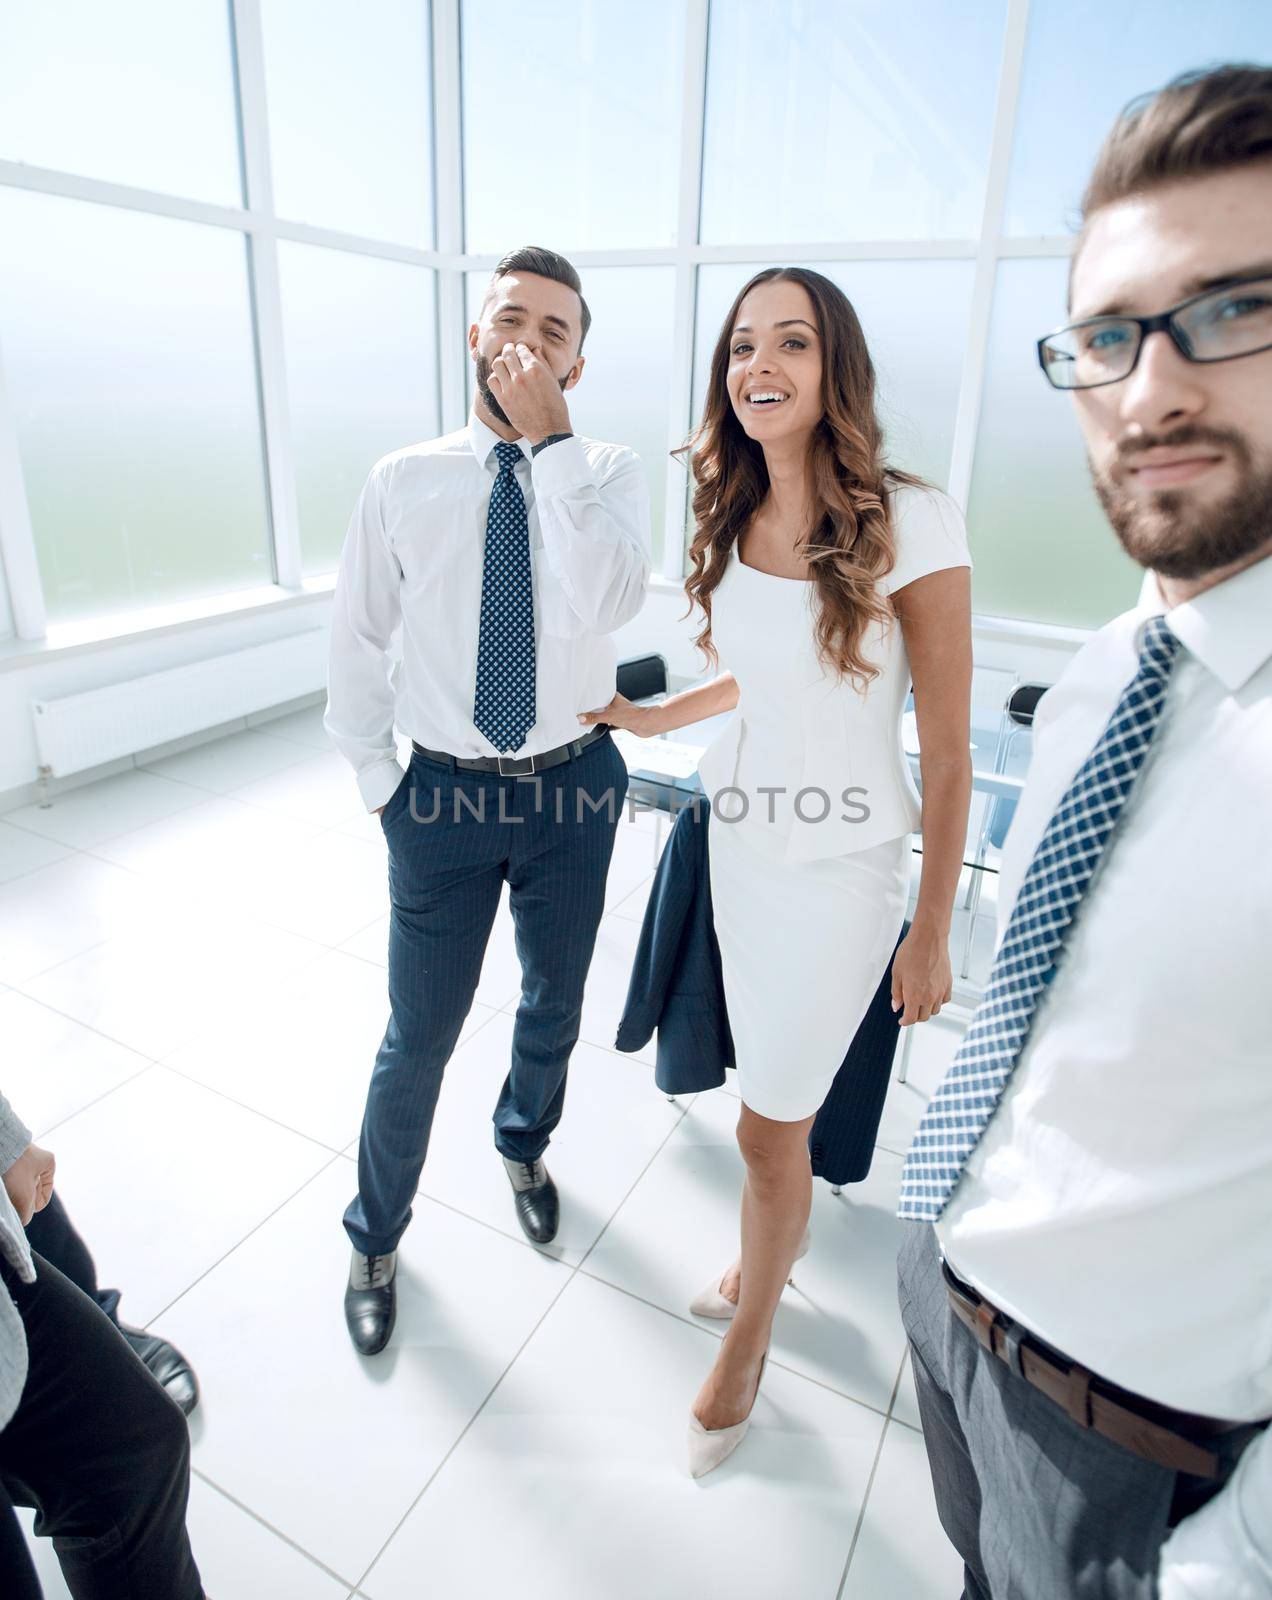 group of business people standing in the office lobby. photo with copy space